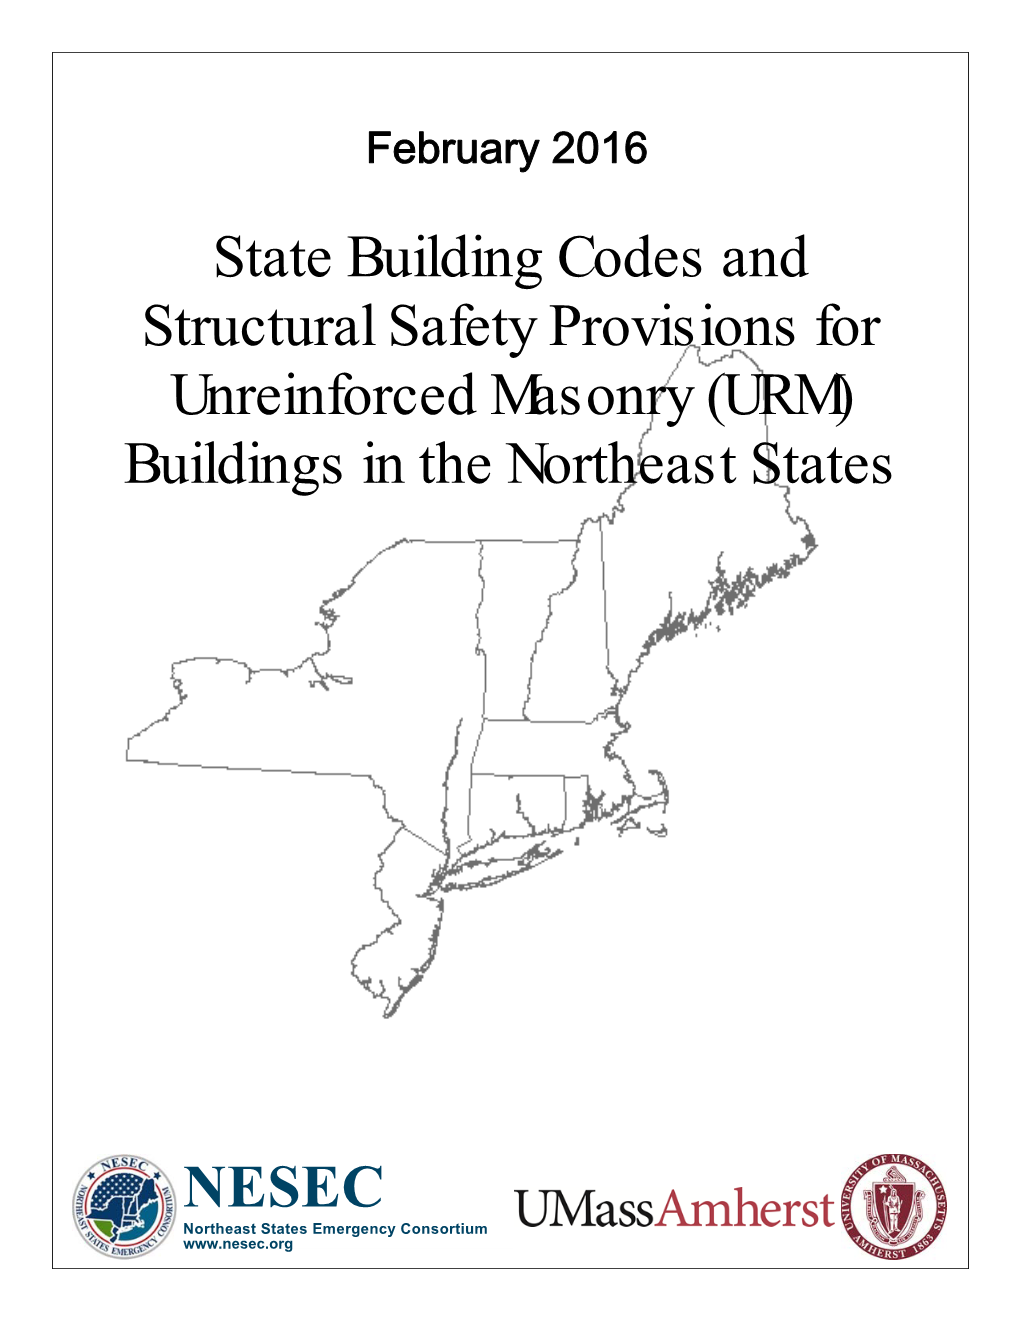 State Building Codes and Structural Safety Provisions for URM